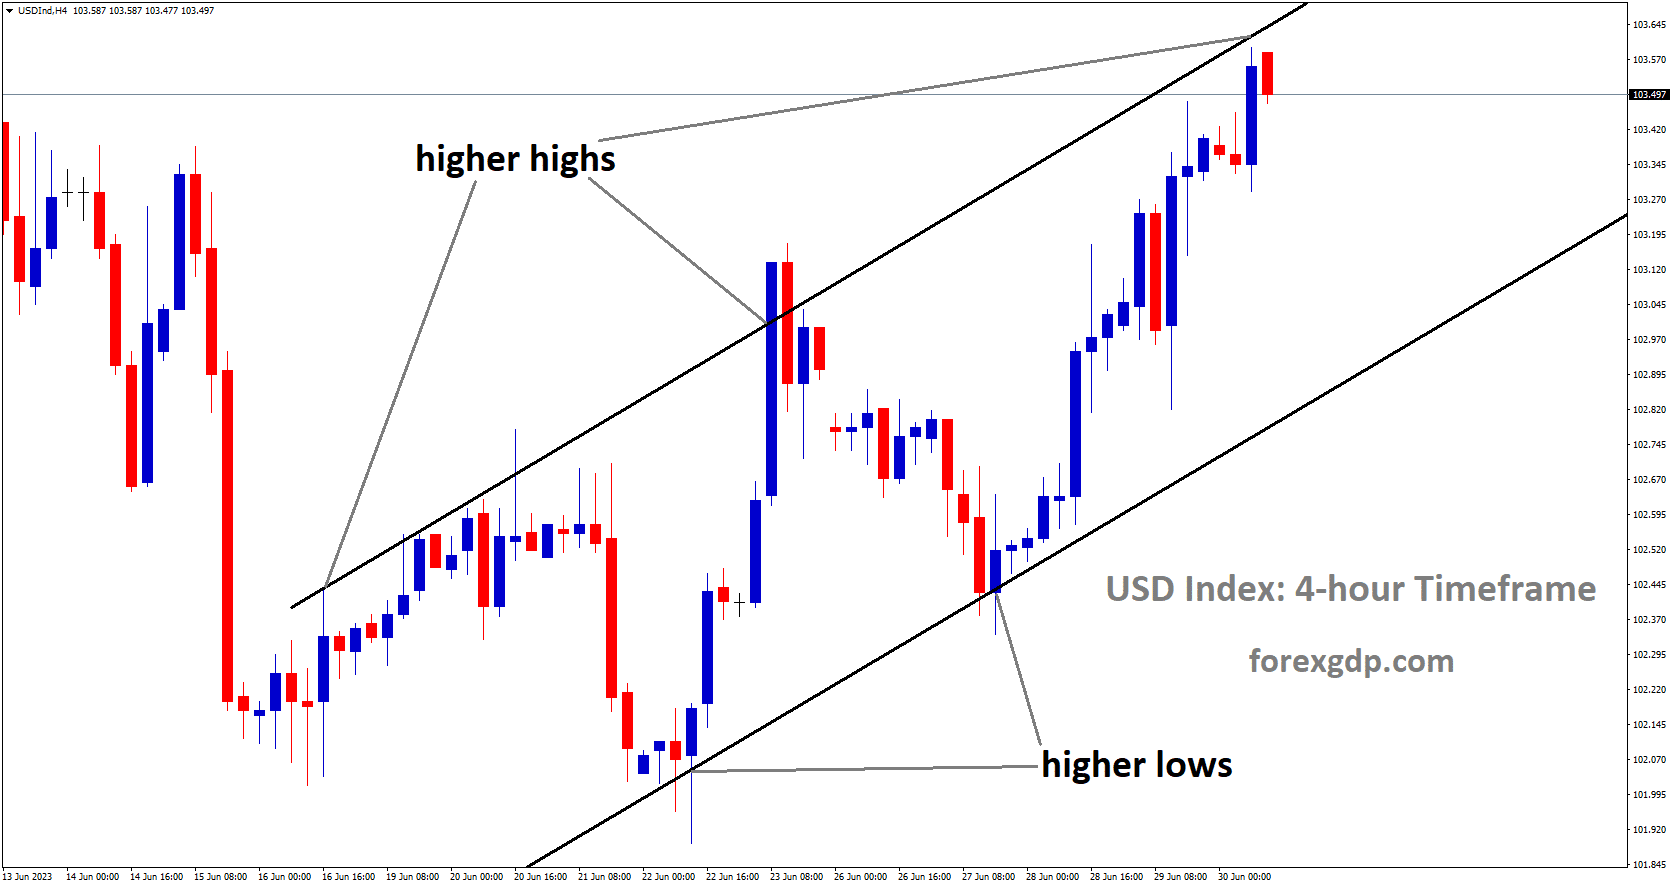 USD Index is moving an Ascending channel and the market has reached the higher high area of the channel.